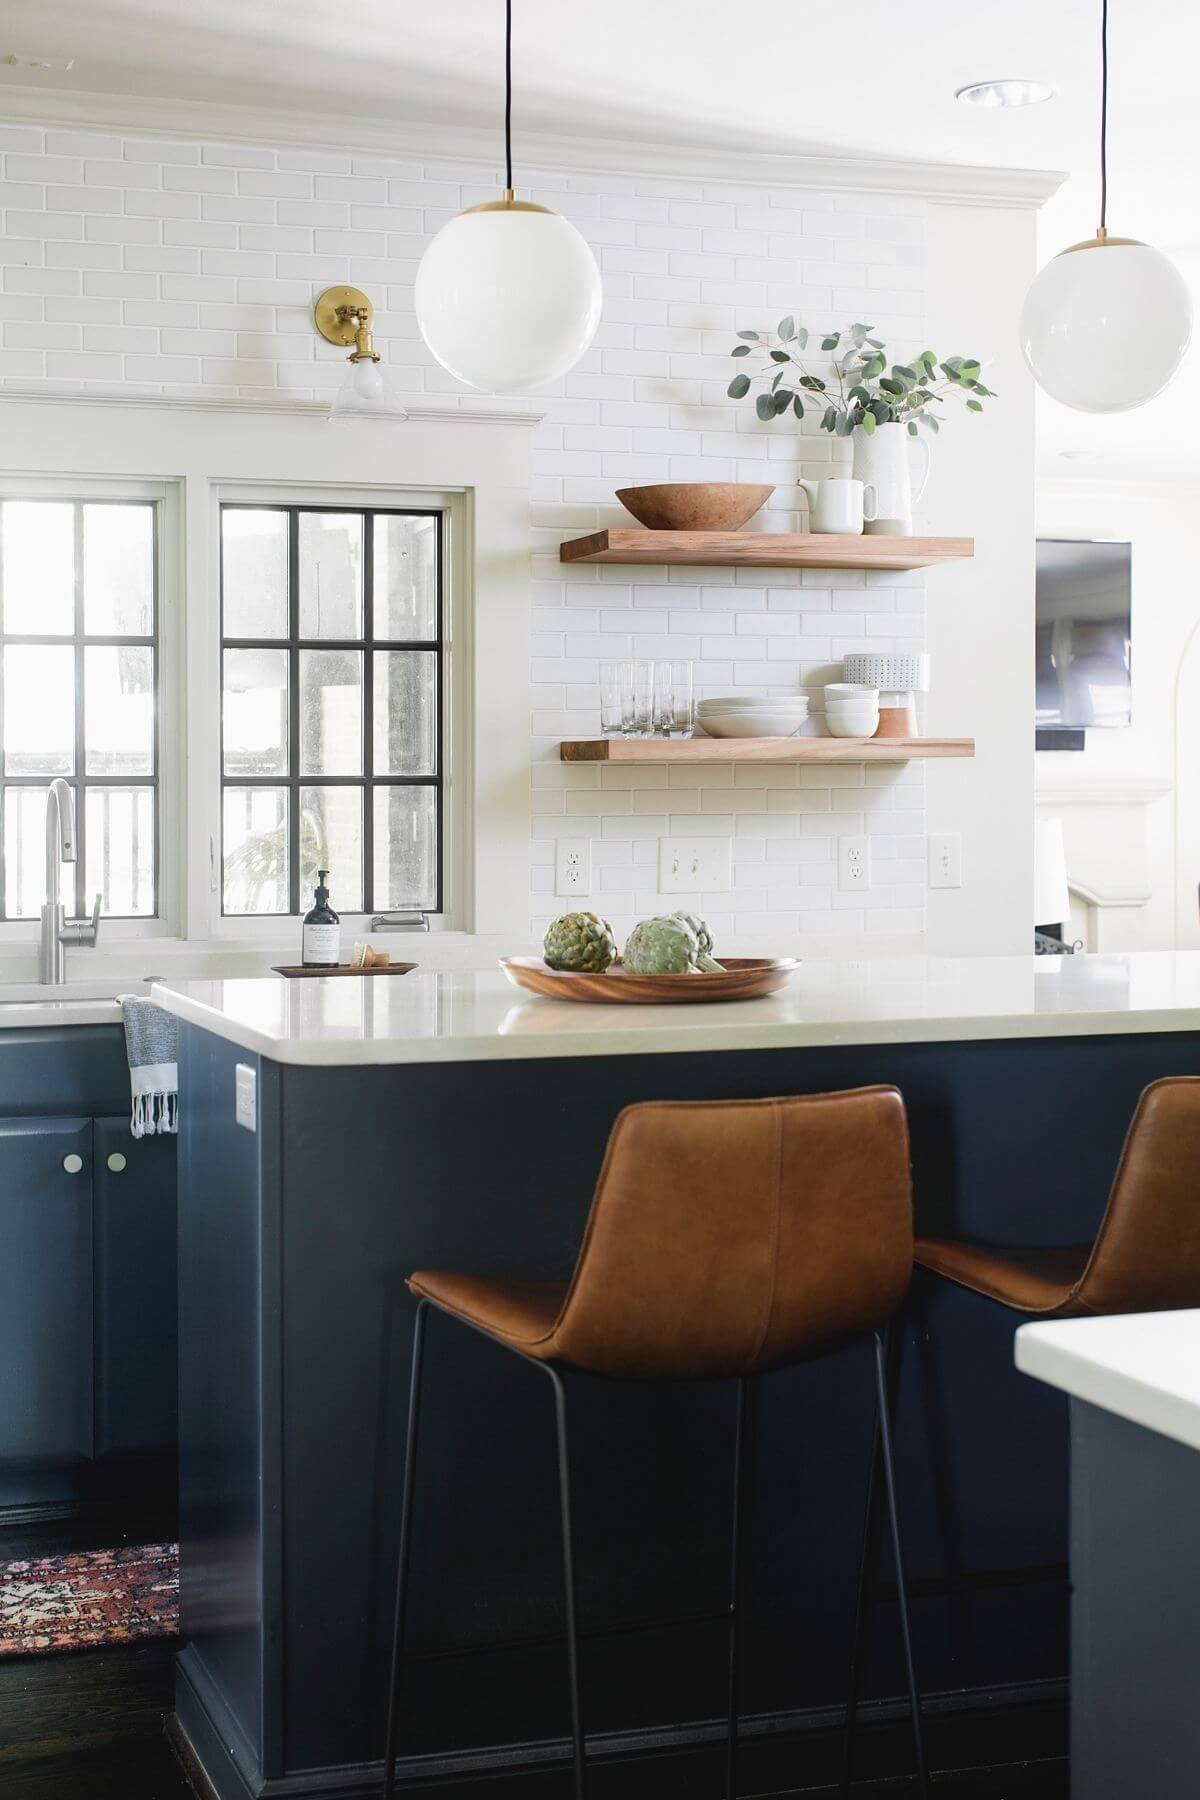 This gleaming white kitchen is accented by rich blue cabinetry below, leather bar stools, handsome lighting and wooden floating shelves. Image: Graham Yelton